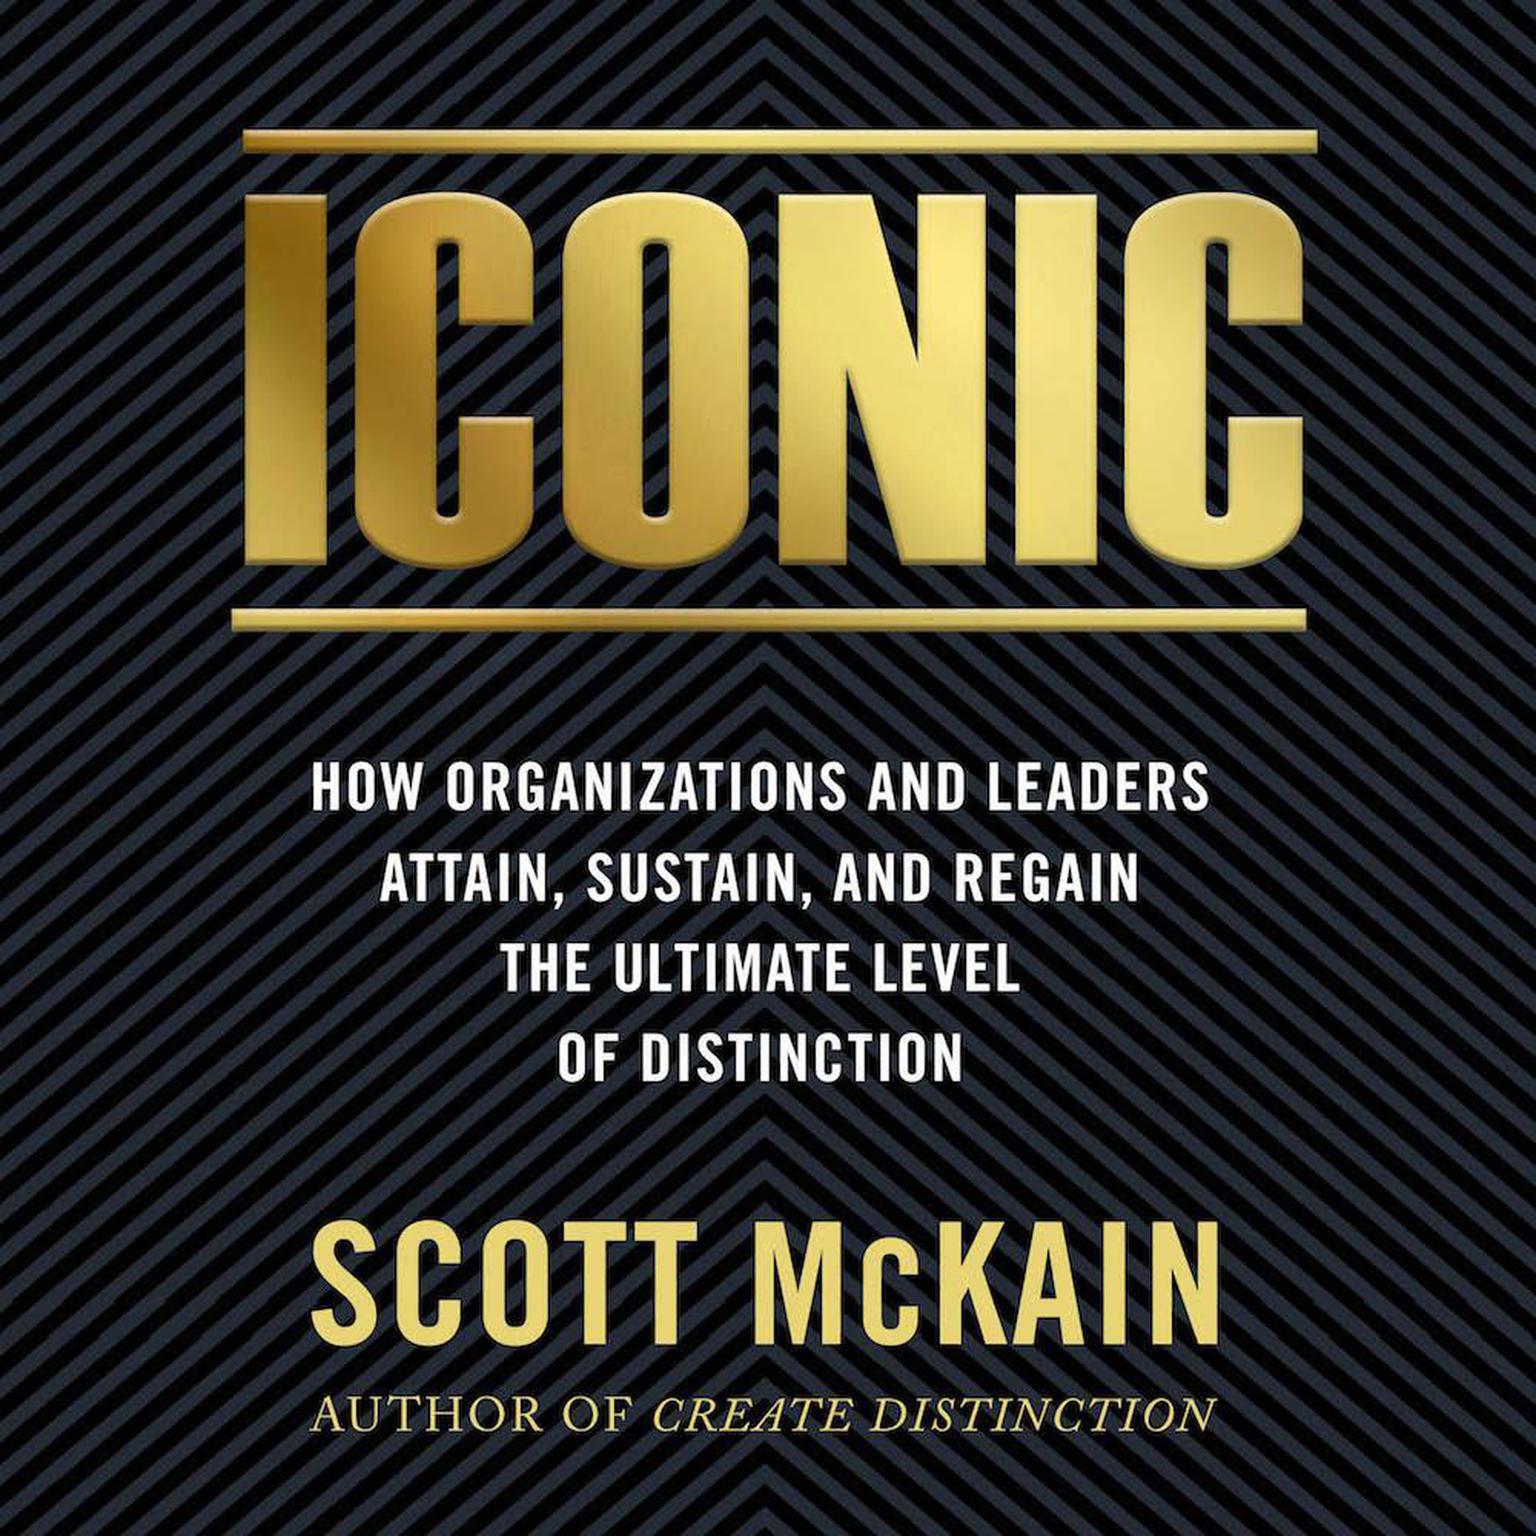 ICONIC: How Organizations and Leaders Attain, Sustain, and Regain the Ultimate Level of Distinction Audiobook, by Scott McKain